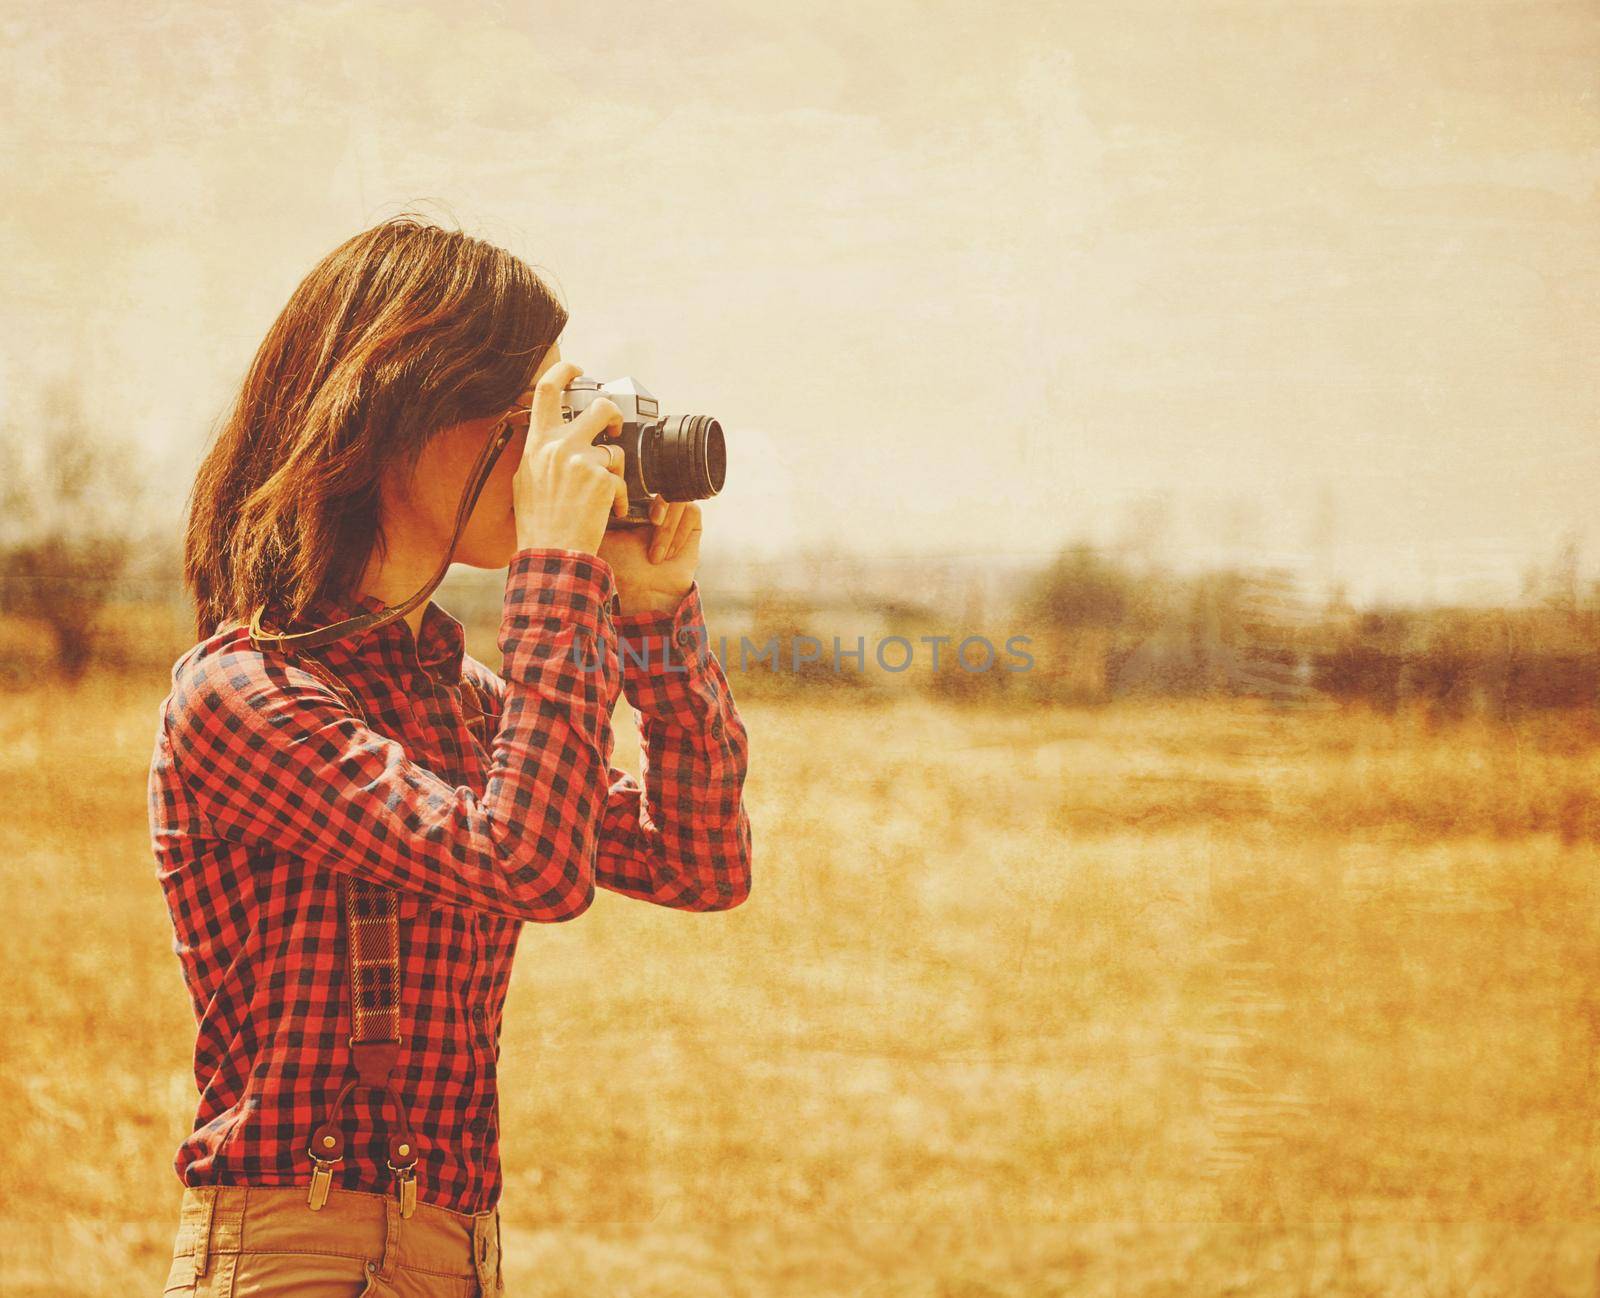 Young woman takes photographs with vintage photo camera in autumn outdoor. Vintage image